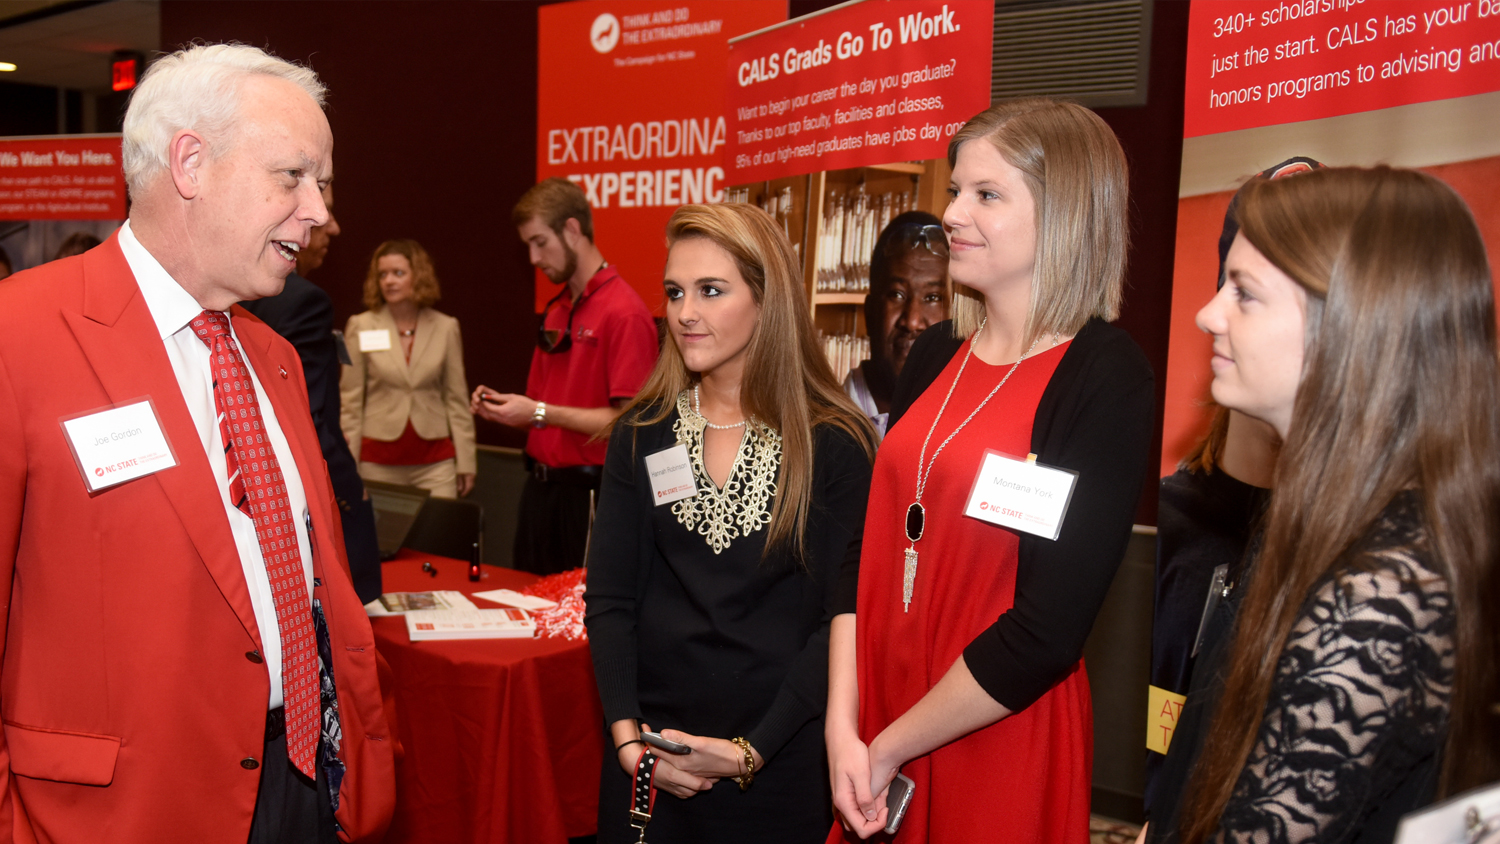 AGI students networking with NC State alums at event